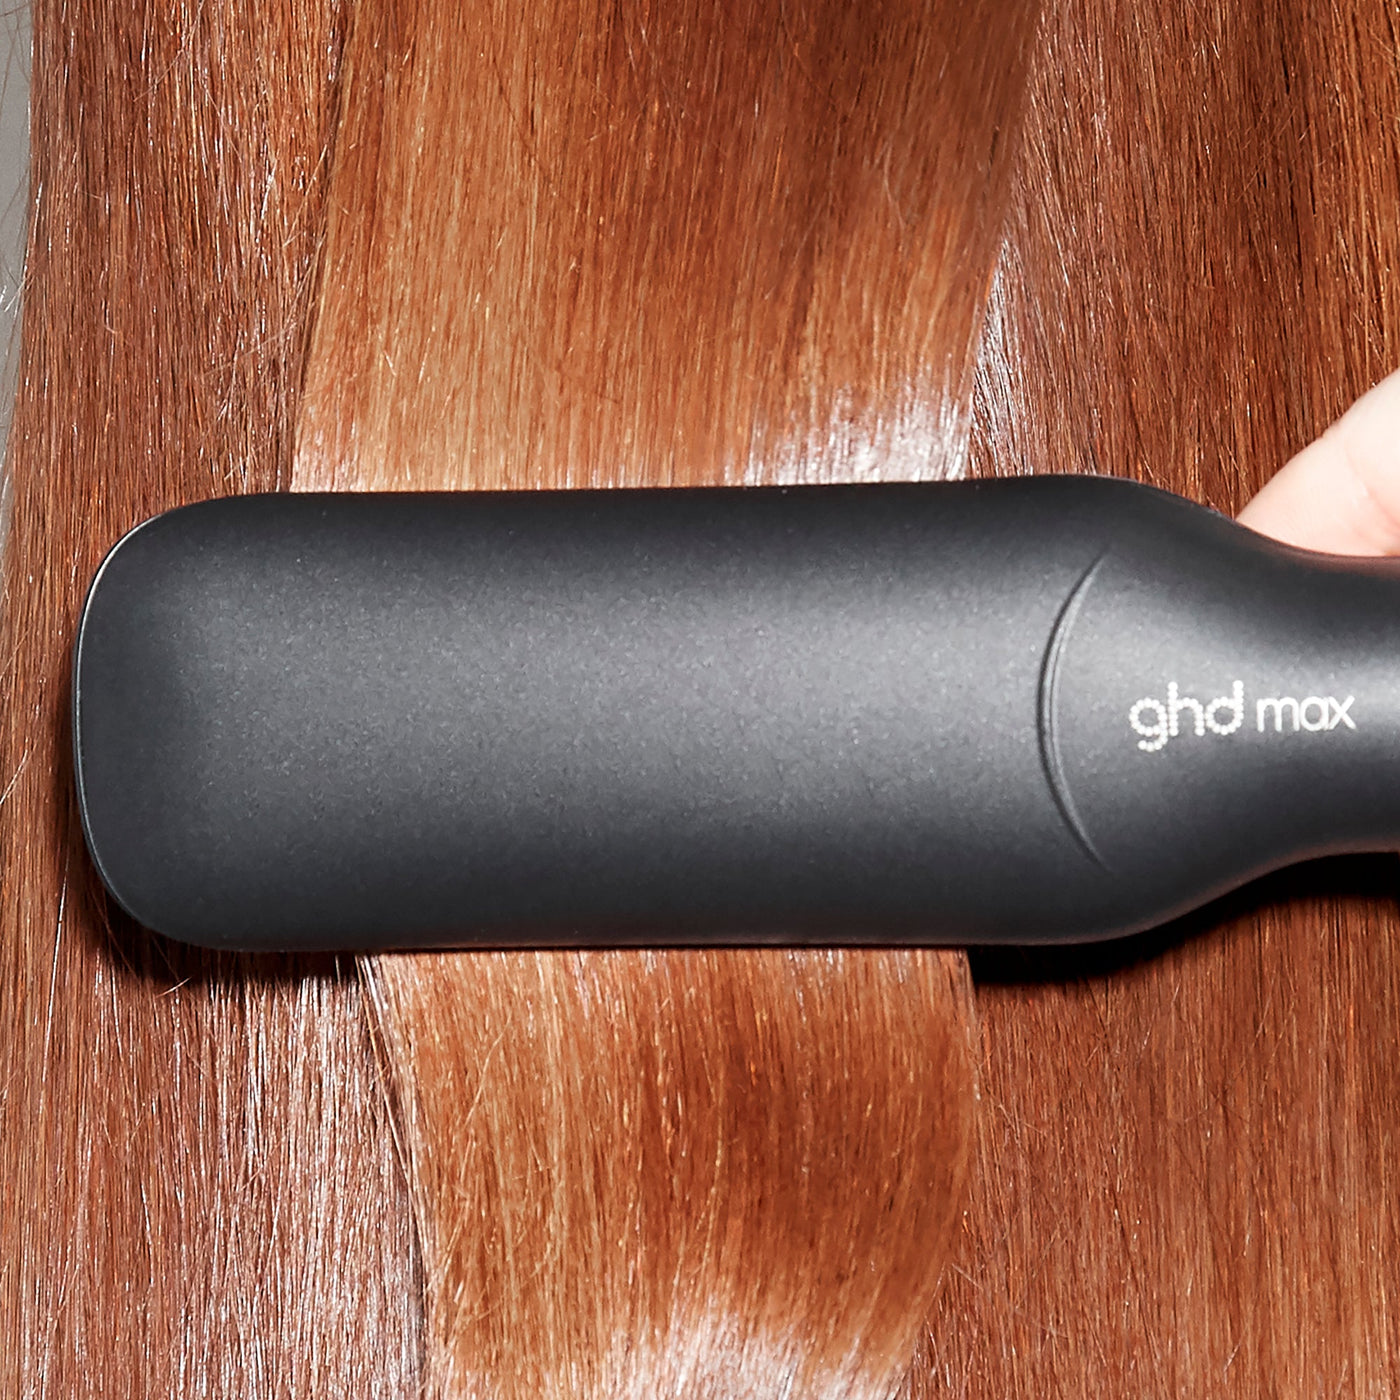 ghd Max Hair Straightener in use